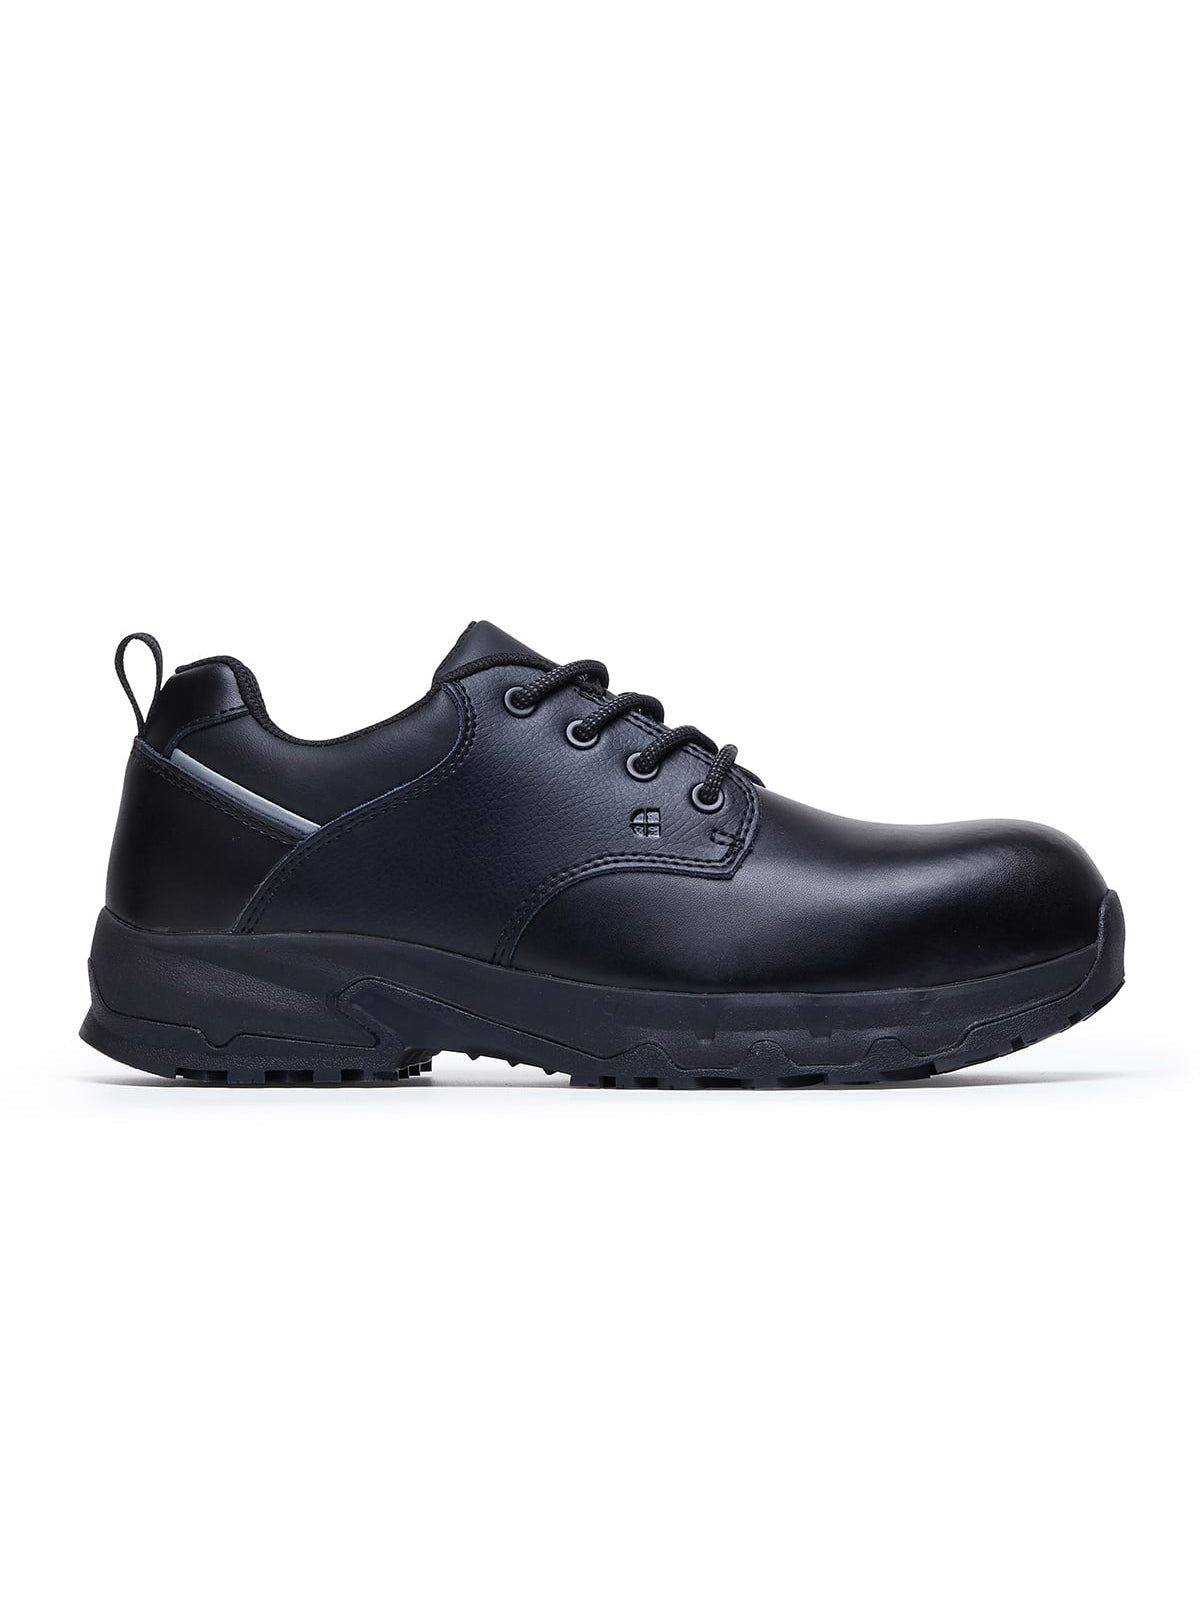 Unisex Safety Shoe Forkhill (S3) by Shoes For Crews -  ChefsCotton